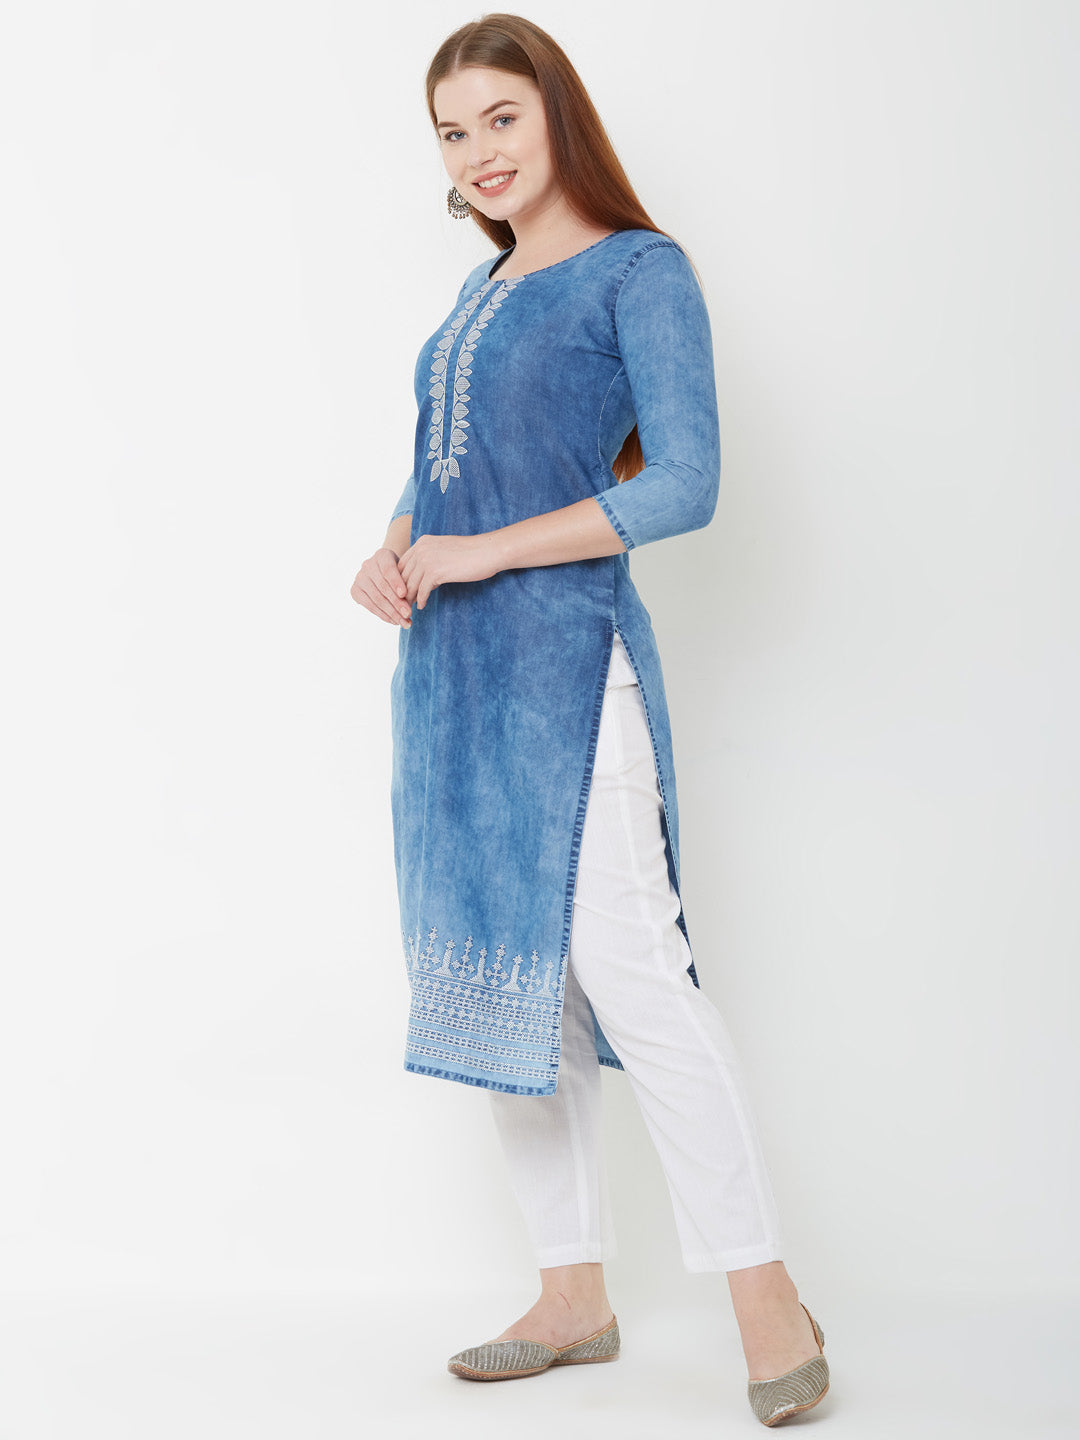 white Kurti with jeans| white Kurti styled with blue denim jeans| Shop  Online #chicken #kurti #with #jeans … | Kurti with jeans, Cotton kurti  designs, Kurti designs